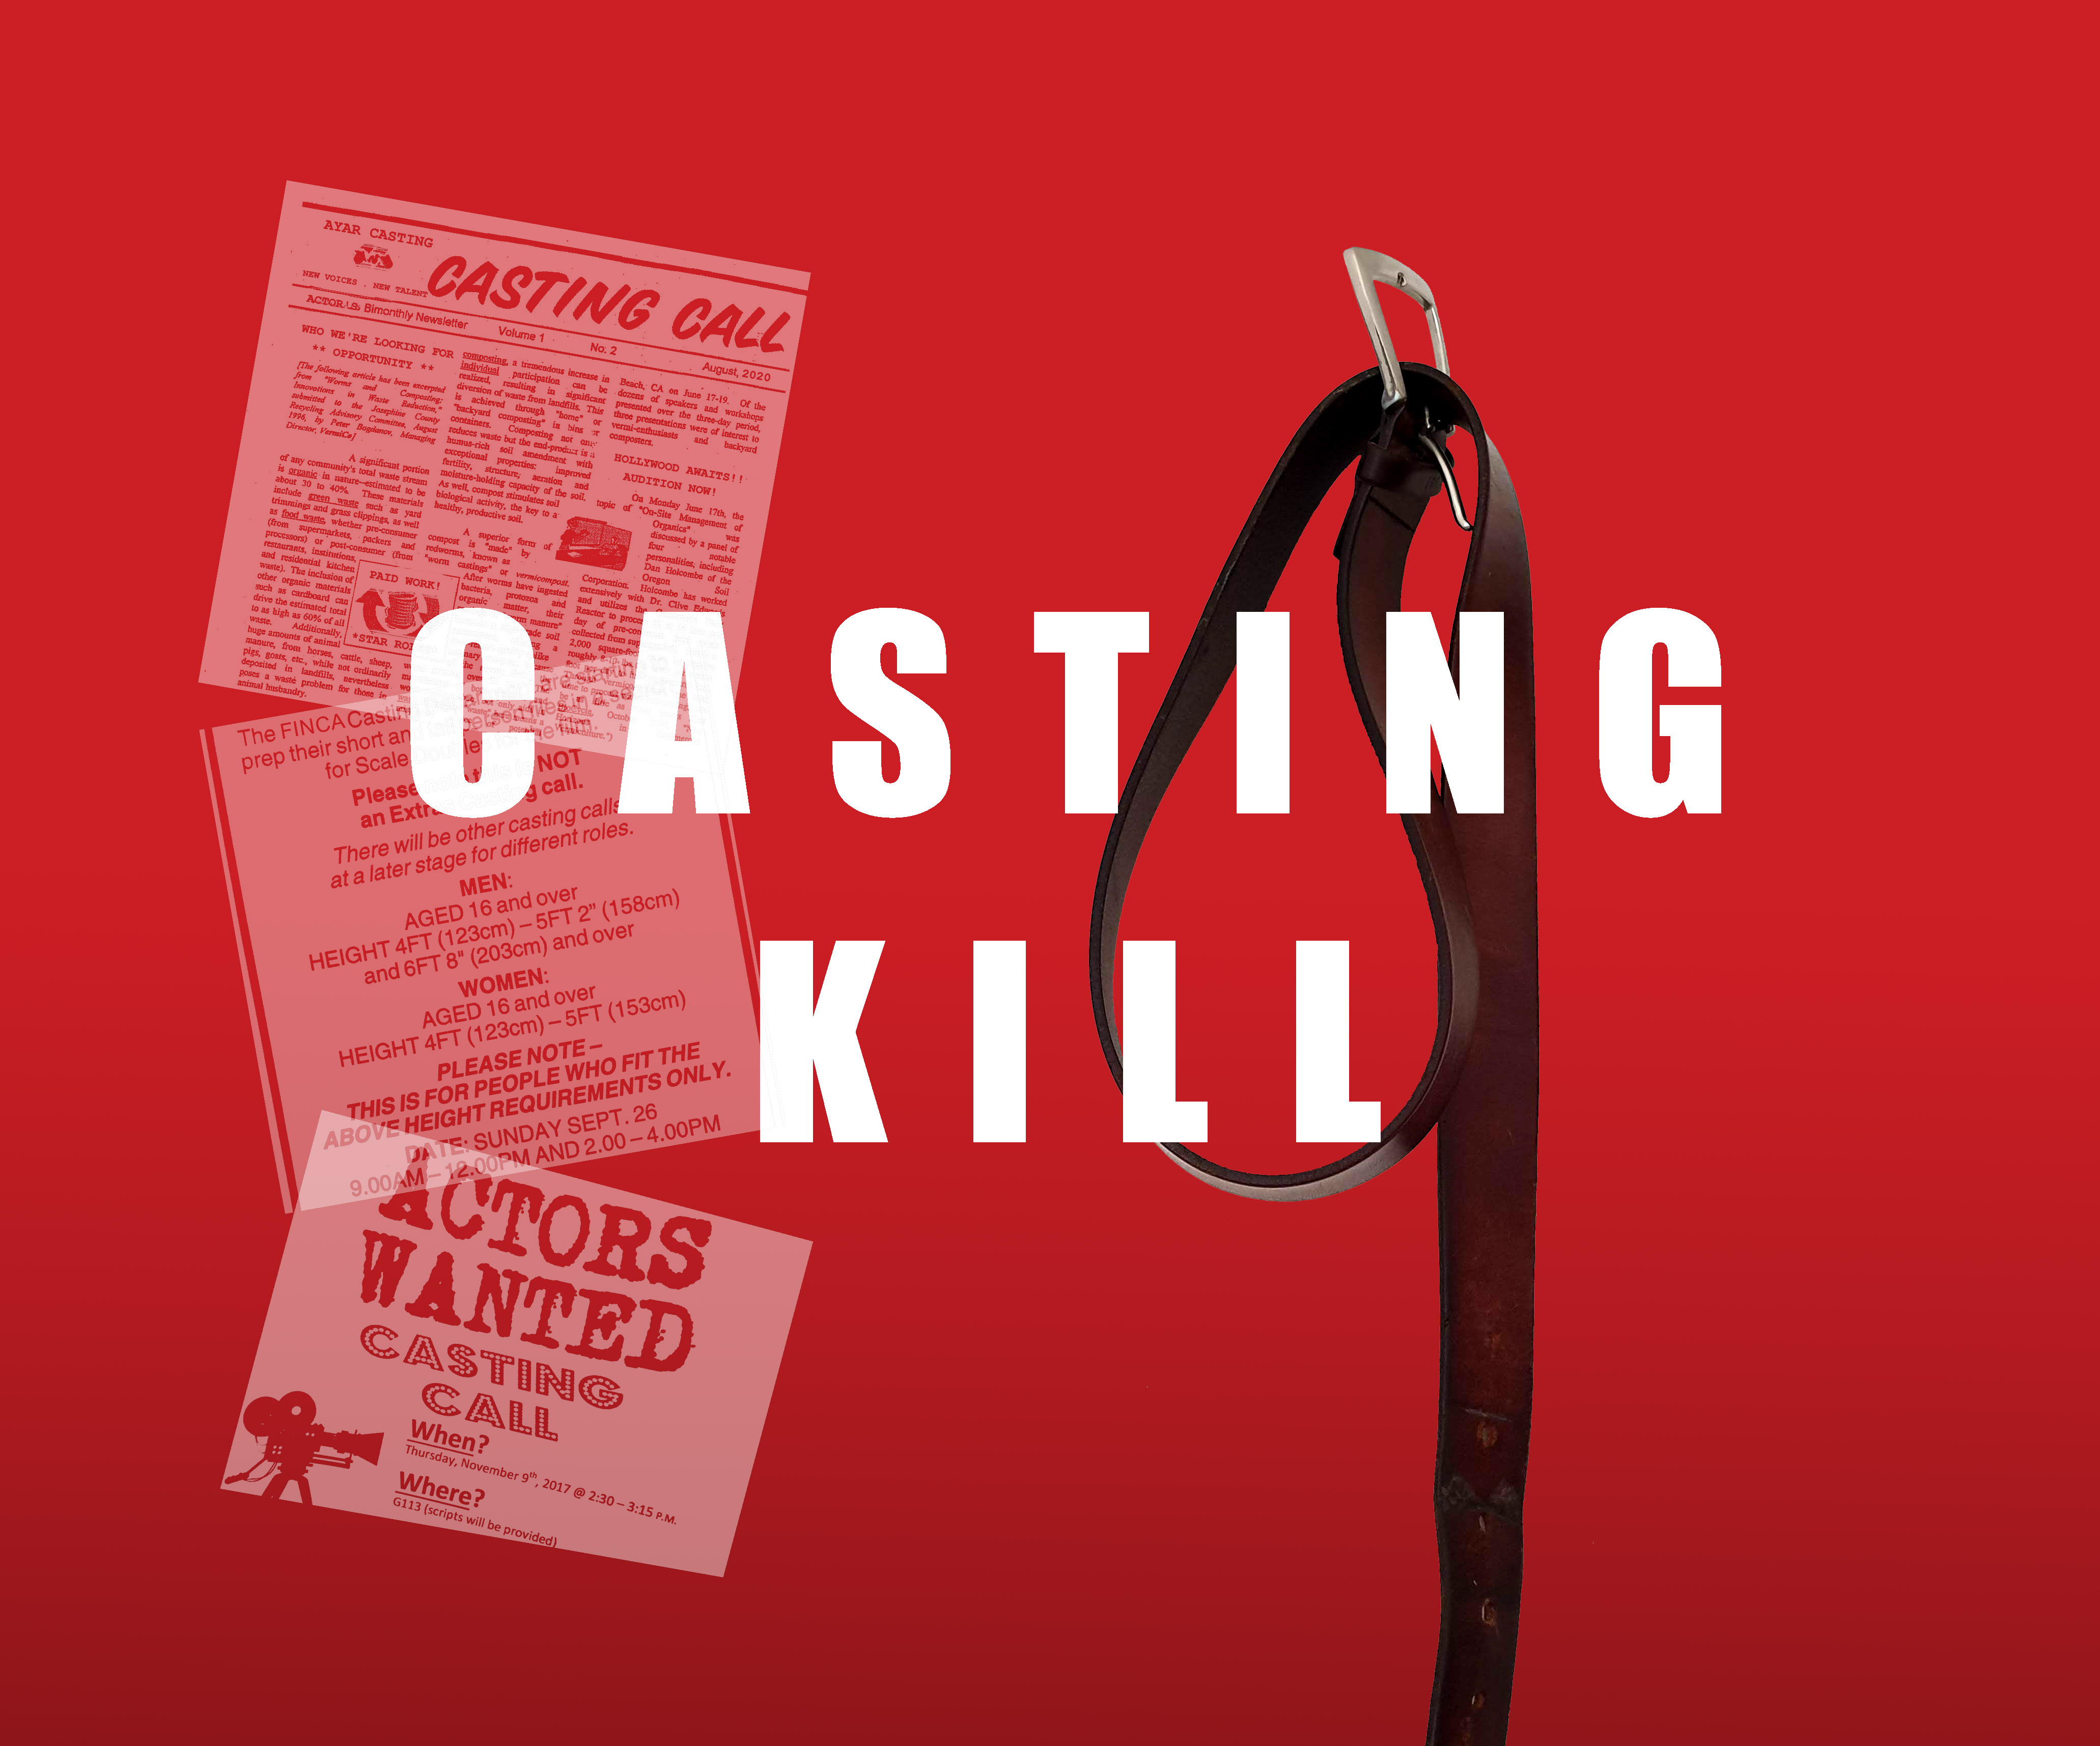 Casting Kill crowdfunding campaign launched